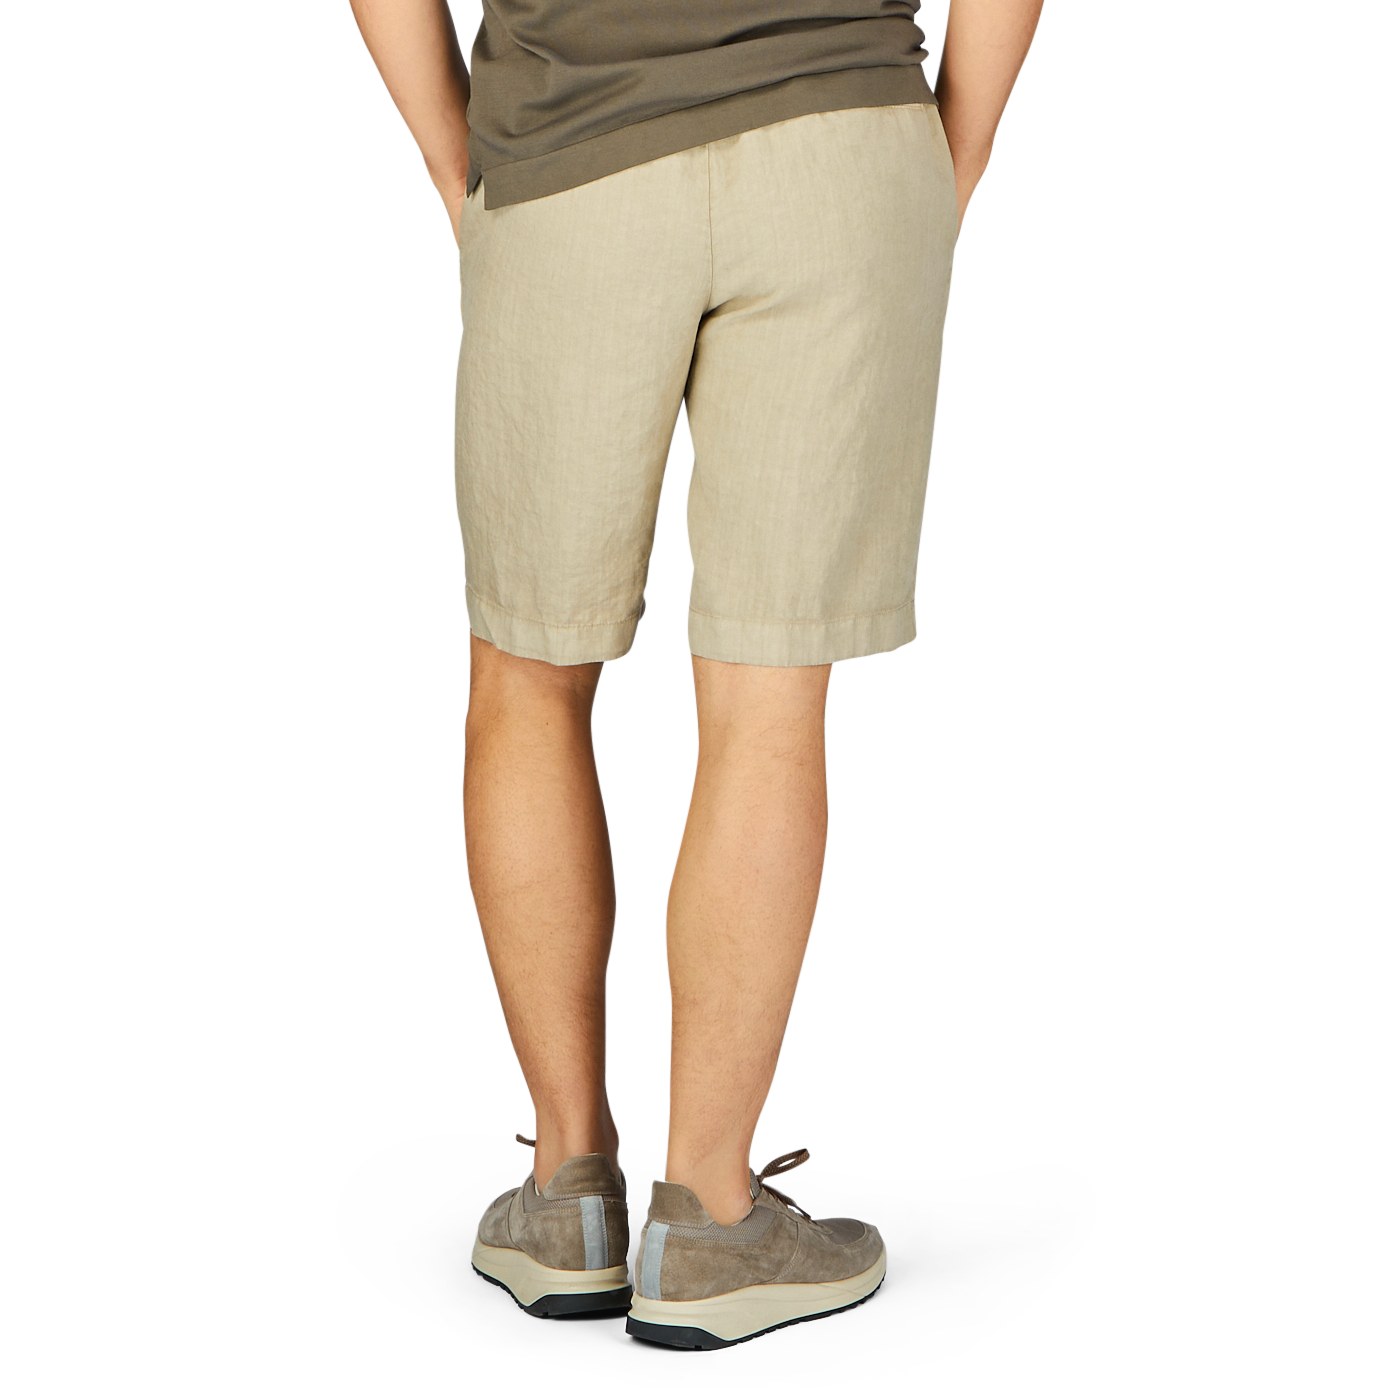 Person standing with their back to the camera, wearing contemporary fit Berwich Beige Washed Linen Drawstring Shorts and gray sneakers.